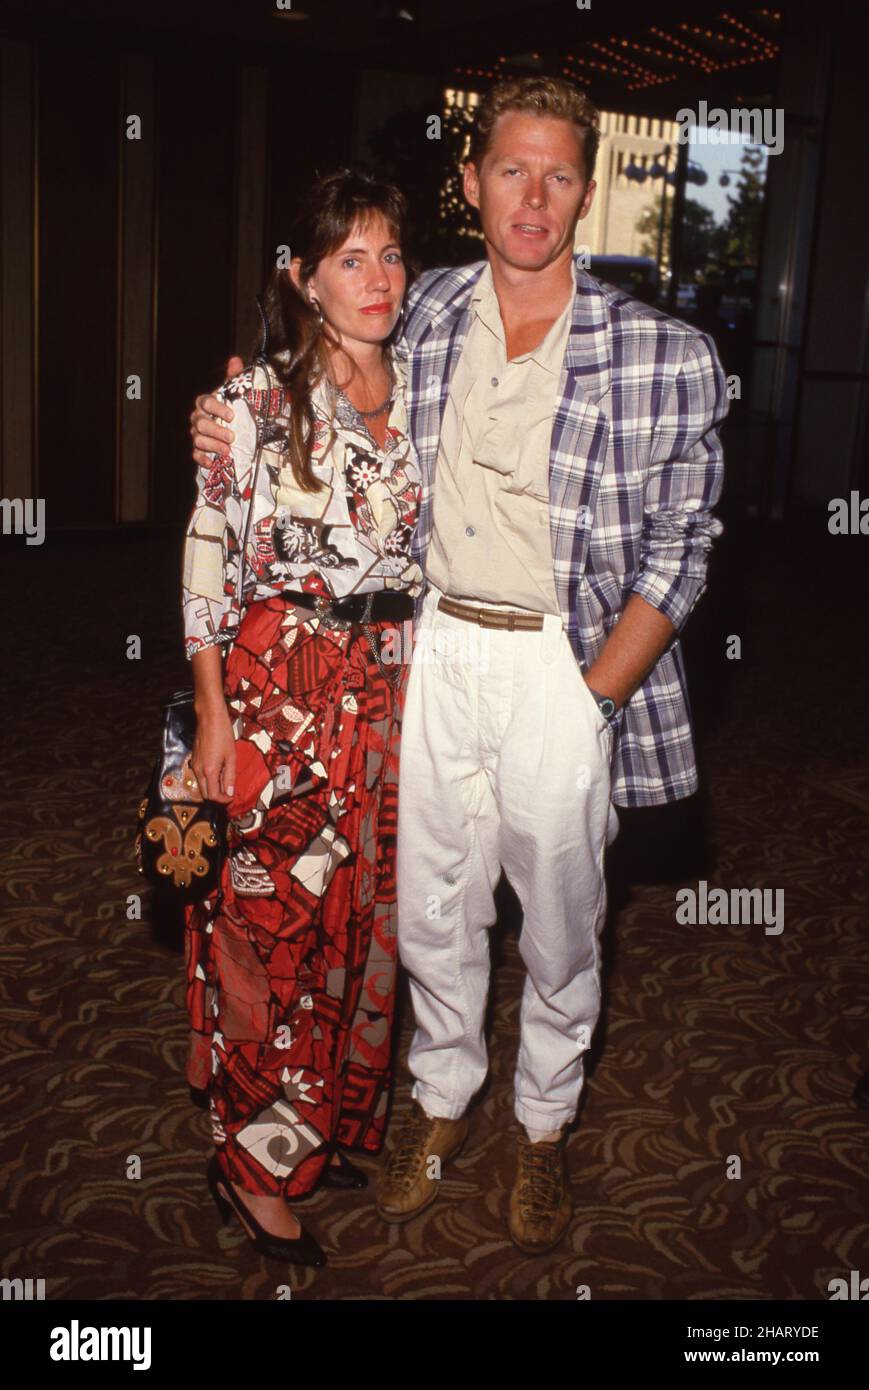 William Katt and wife Deborah attend NBC Television Affiliates Party on June 18, 1986 at the Century Plaza Hotel in Century City, California. Credit: Ralph Dominguez/MediaPunch Stock Photo